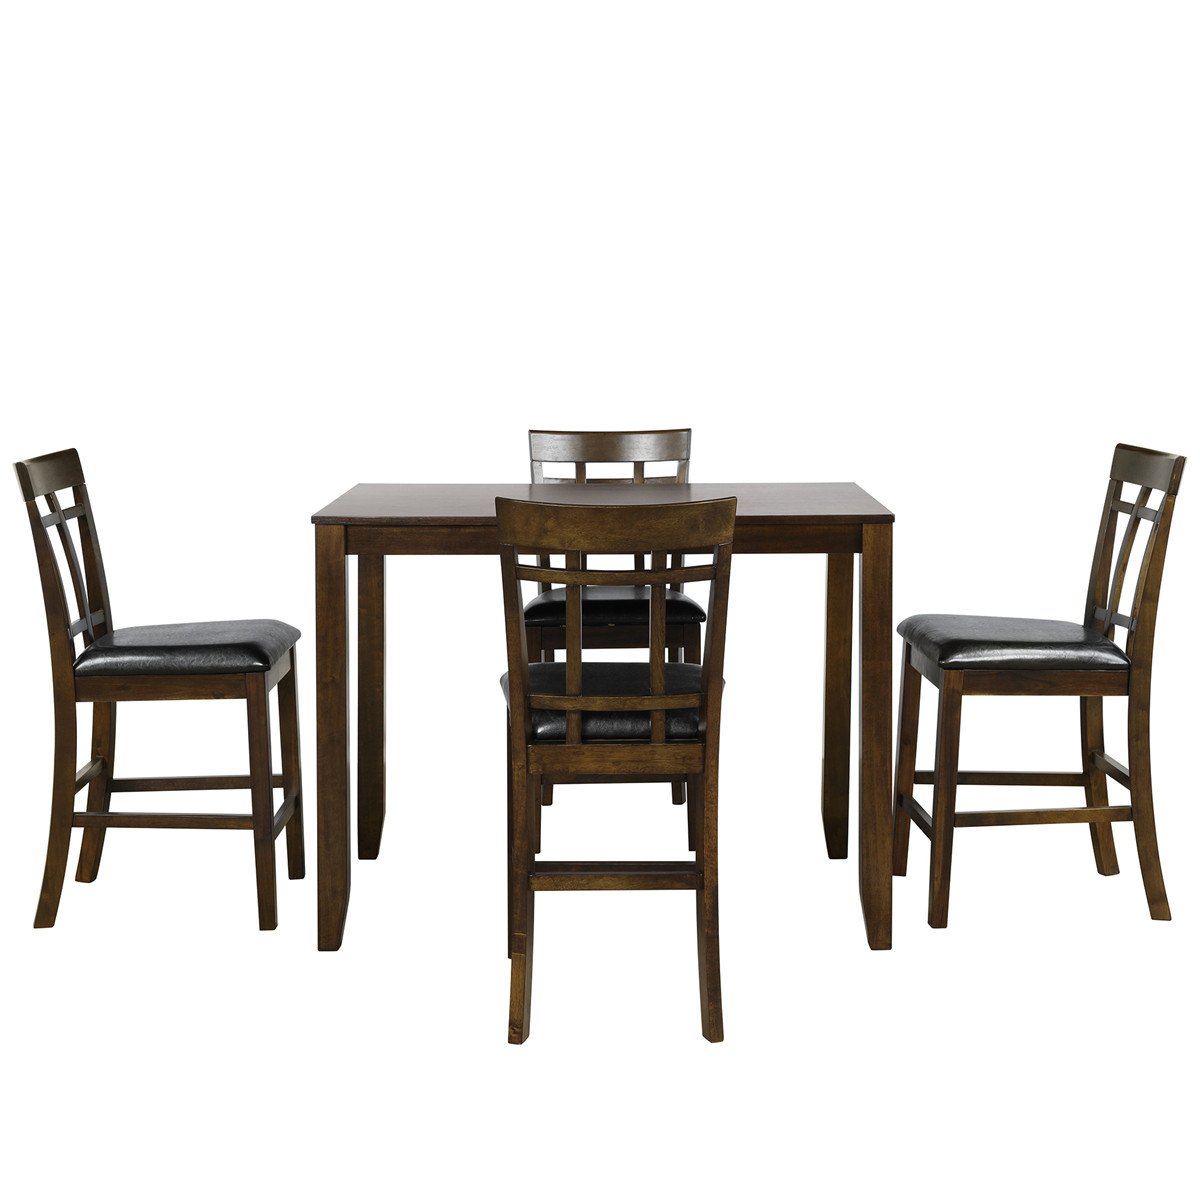 Vintage Rectangular Counter Height Bar Table with 4 Chairs | Wood Dining Table and Chair Set